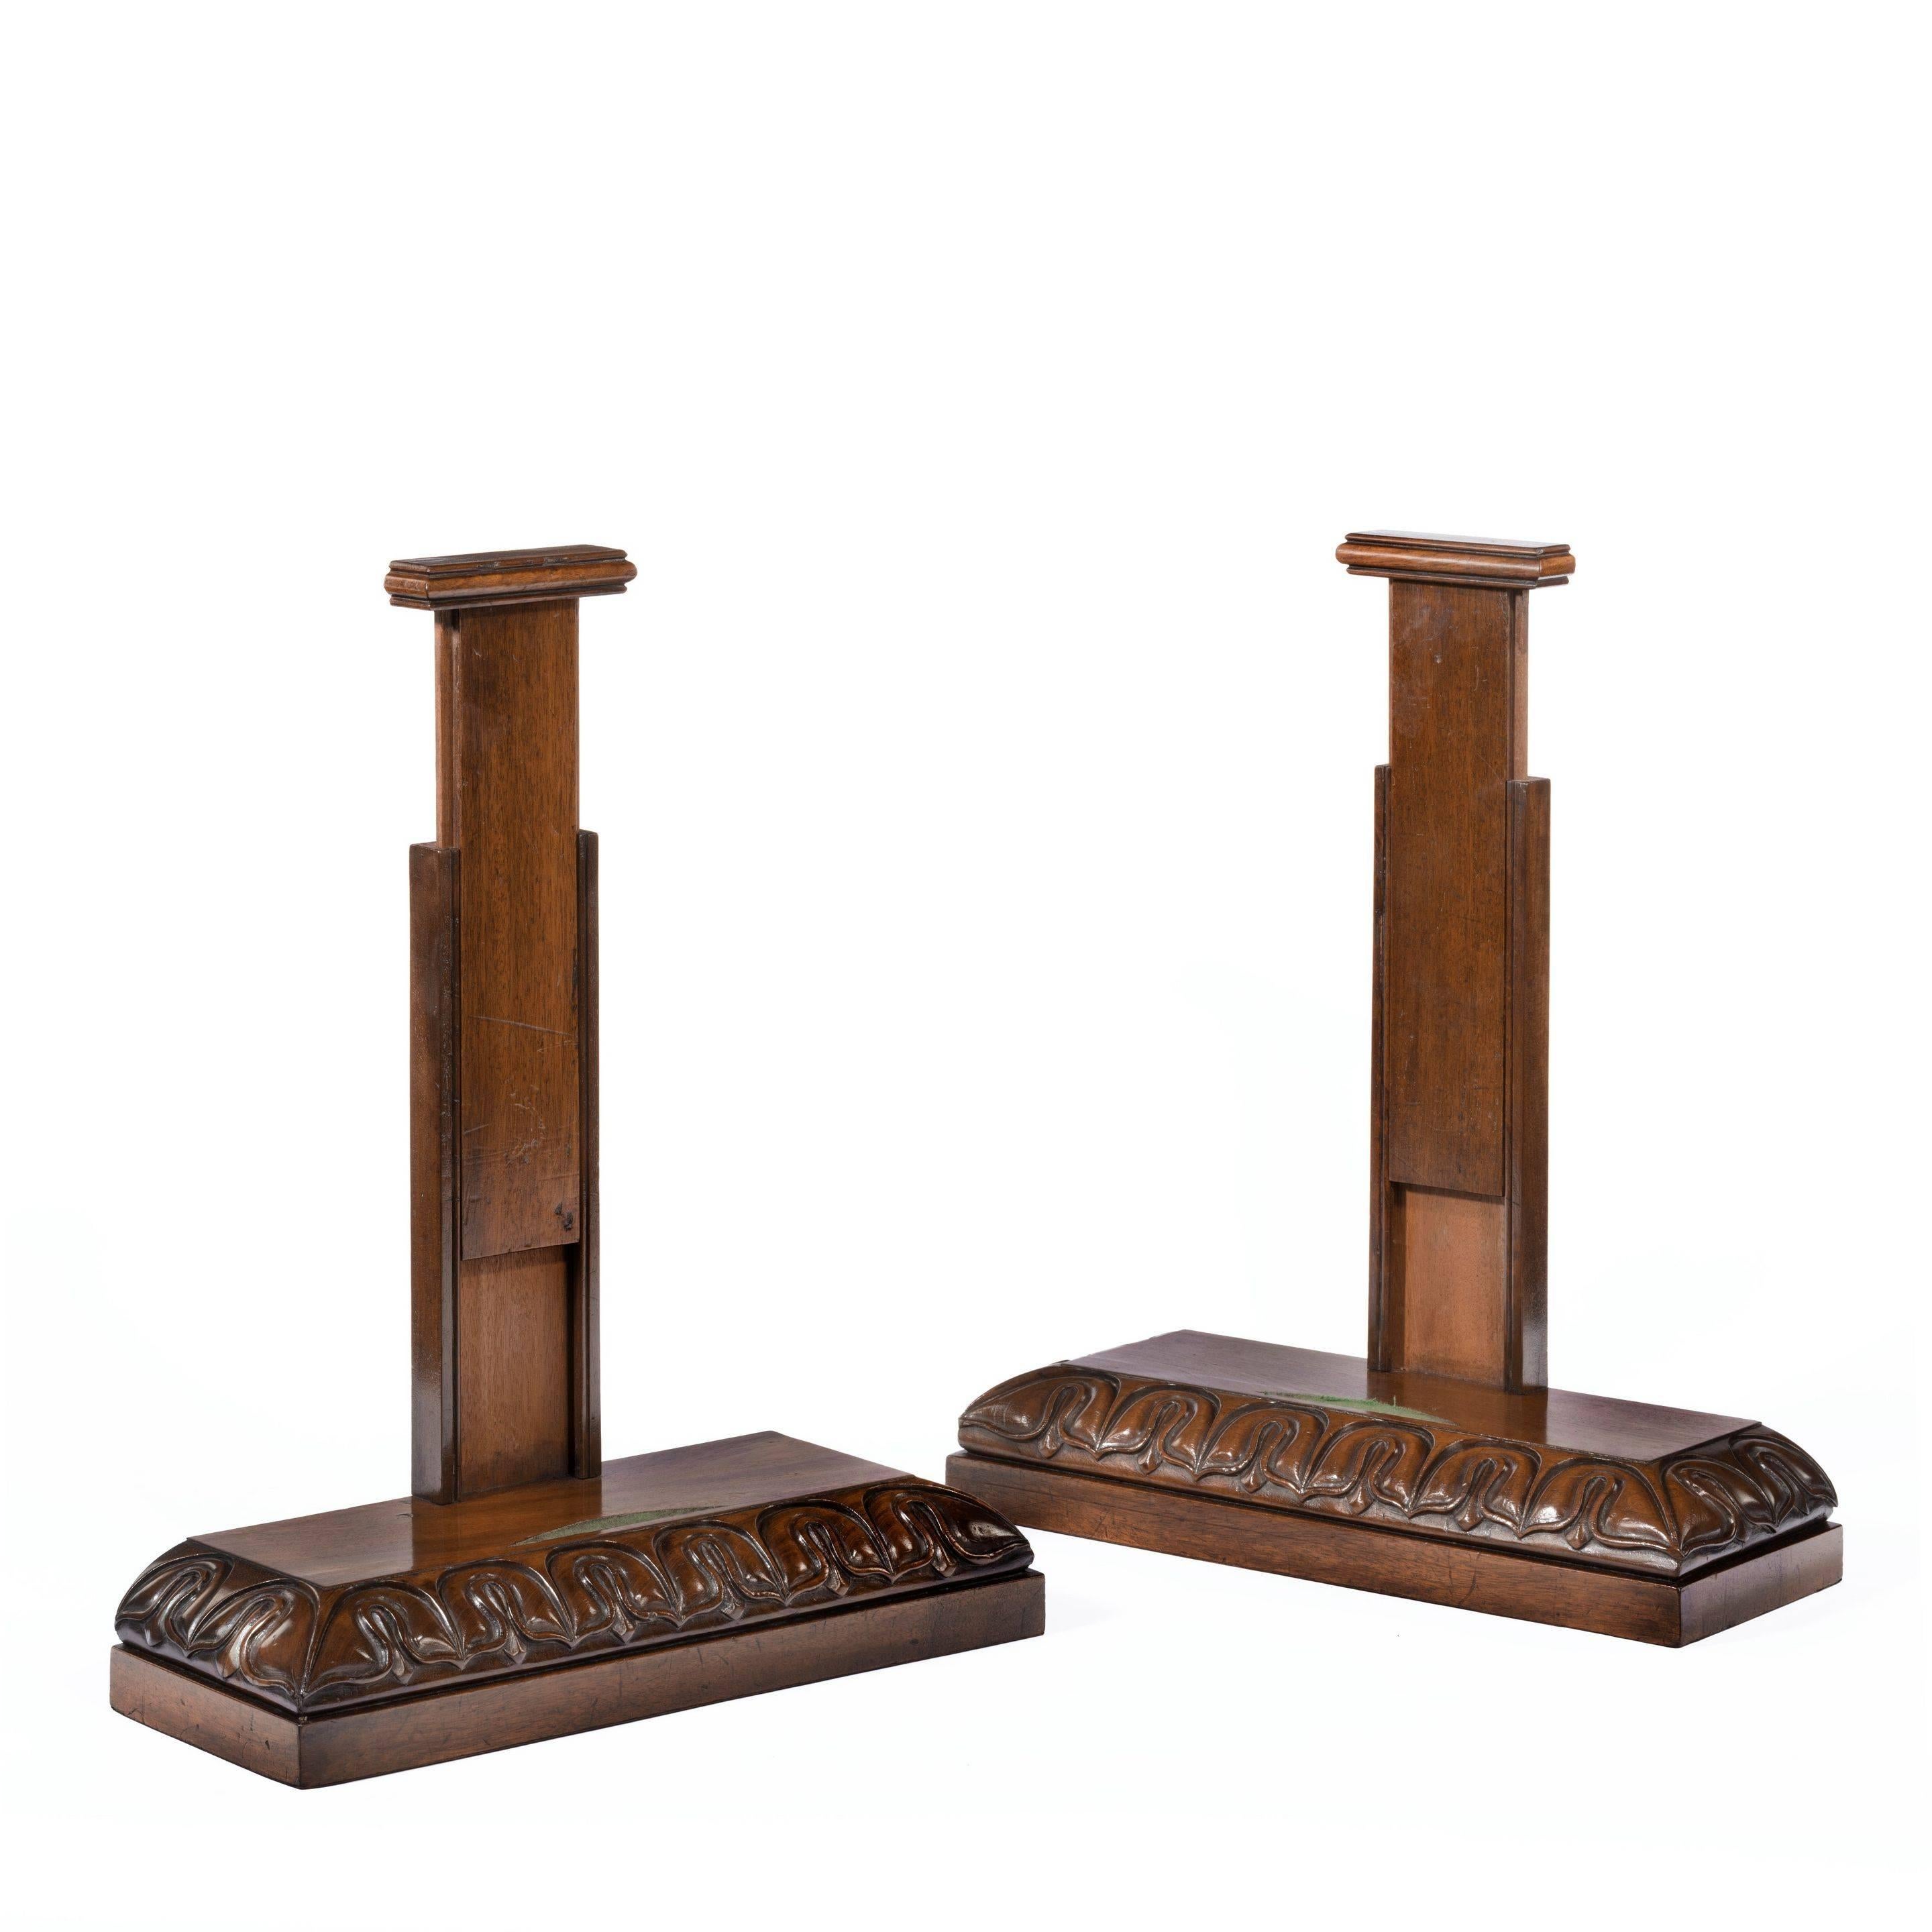 Early 19th Century Pair of Extending Mahogany Salver Stands Attributed to Gillows